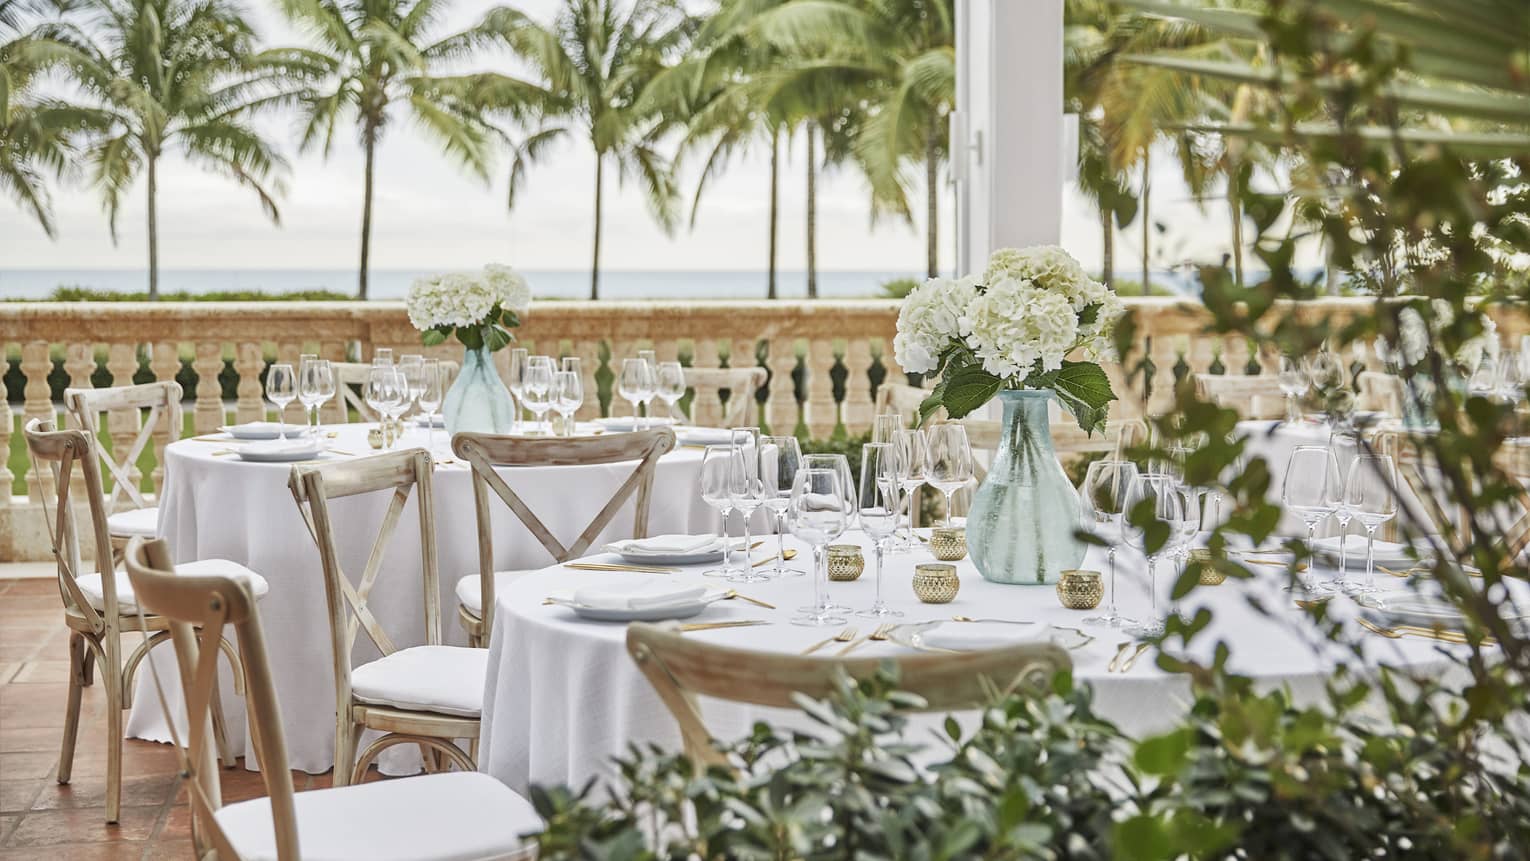 Patio wedding reception dining tables set with glass vases with white flowers, palm trees in background